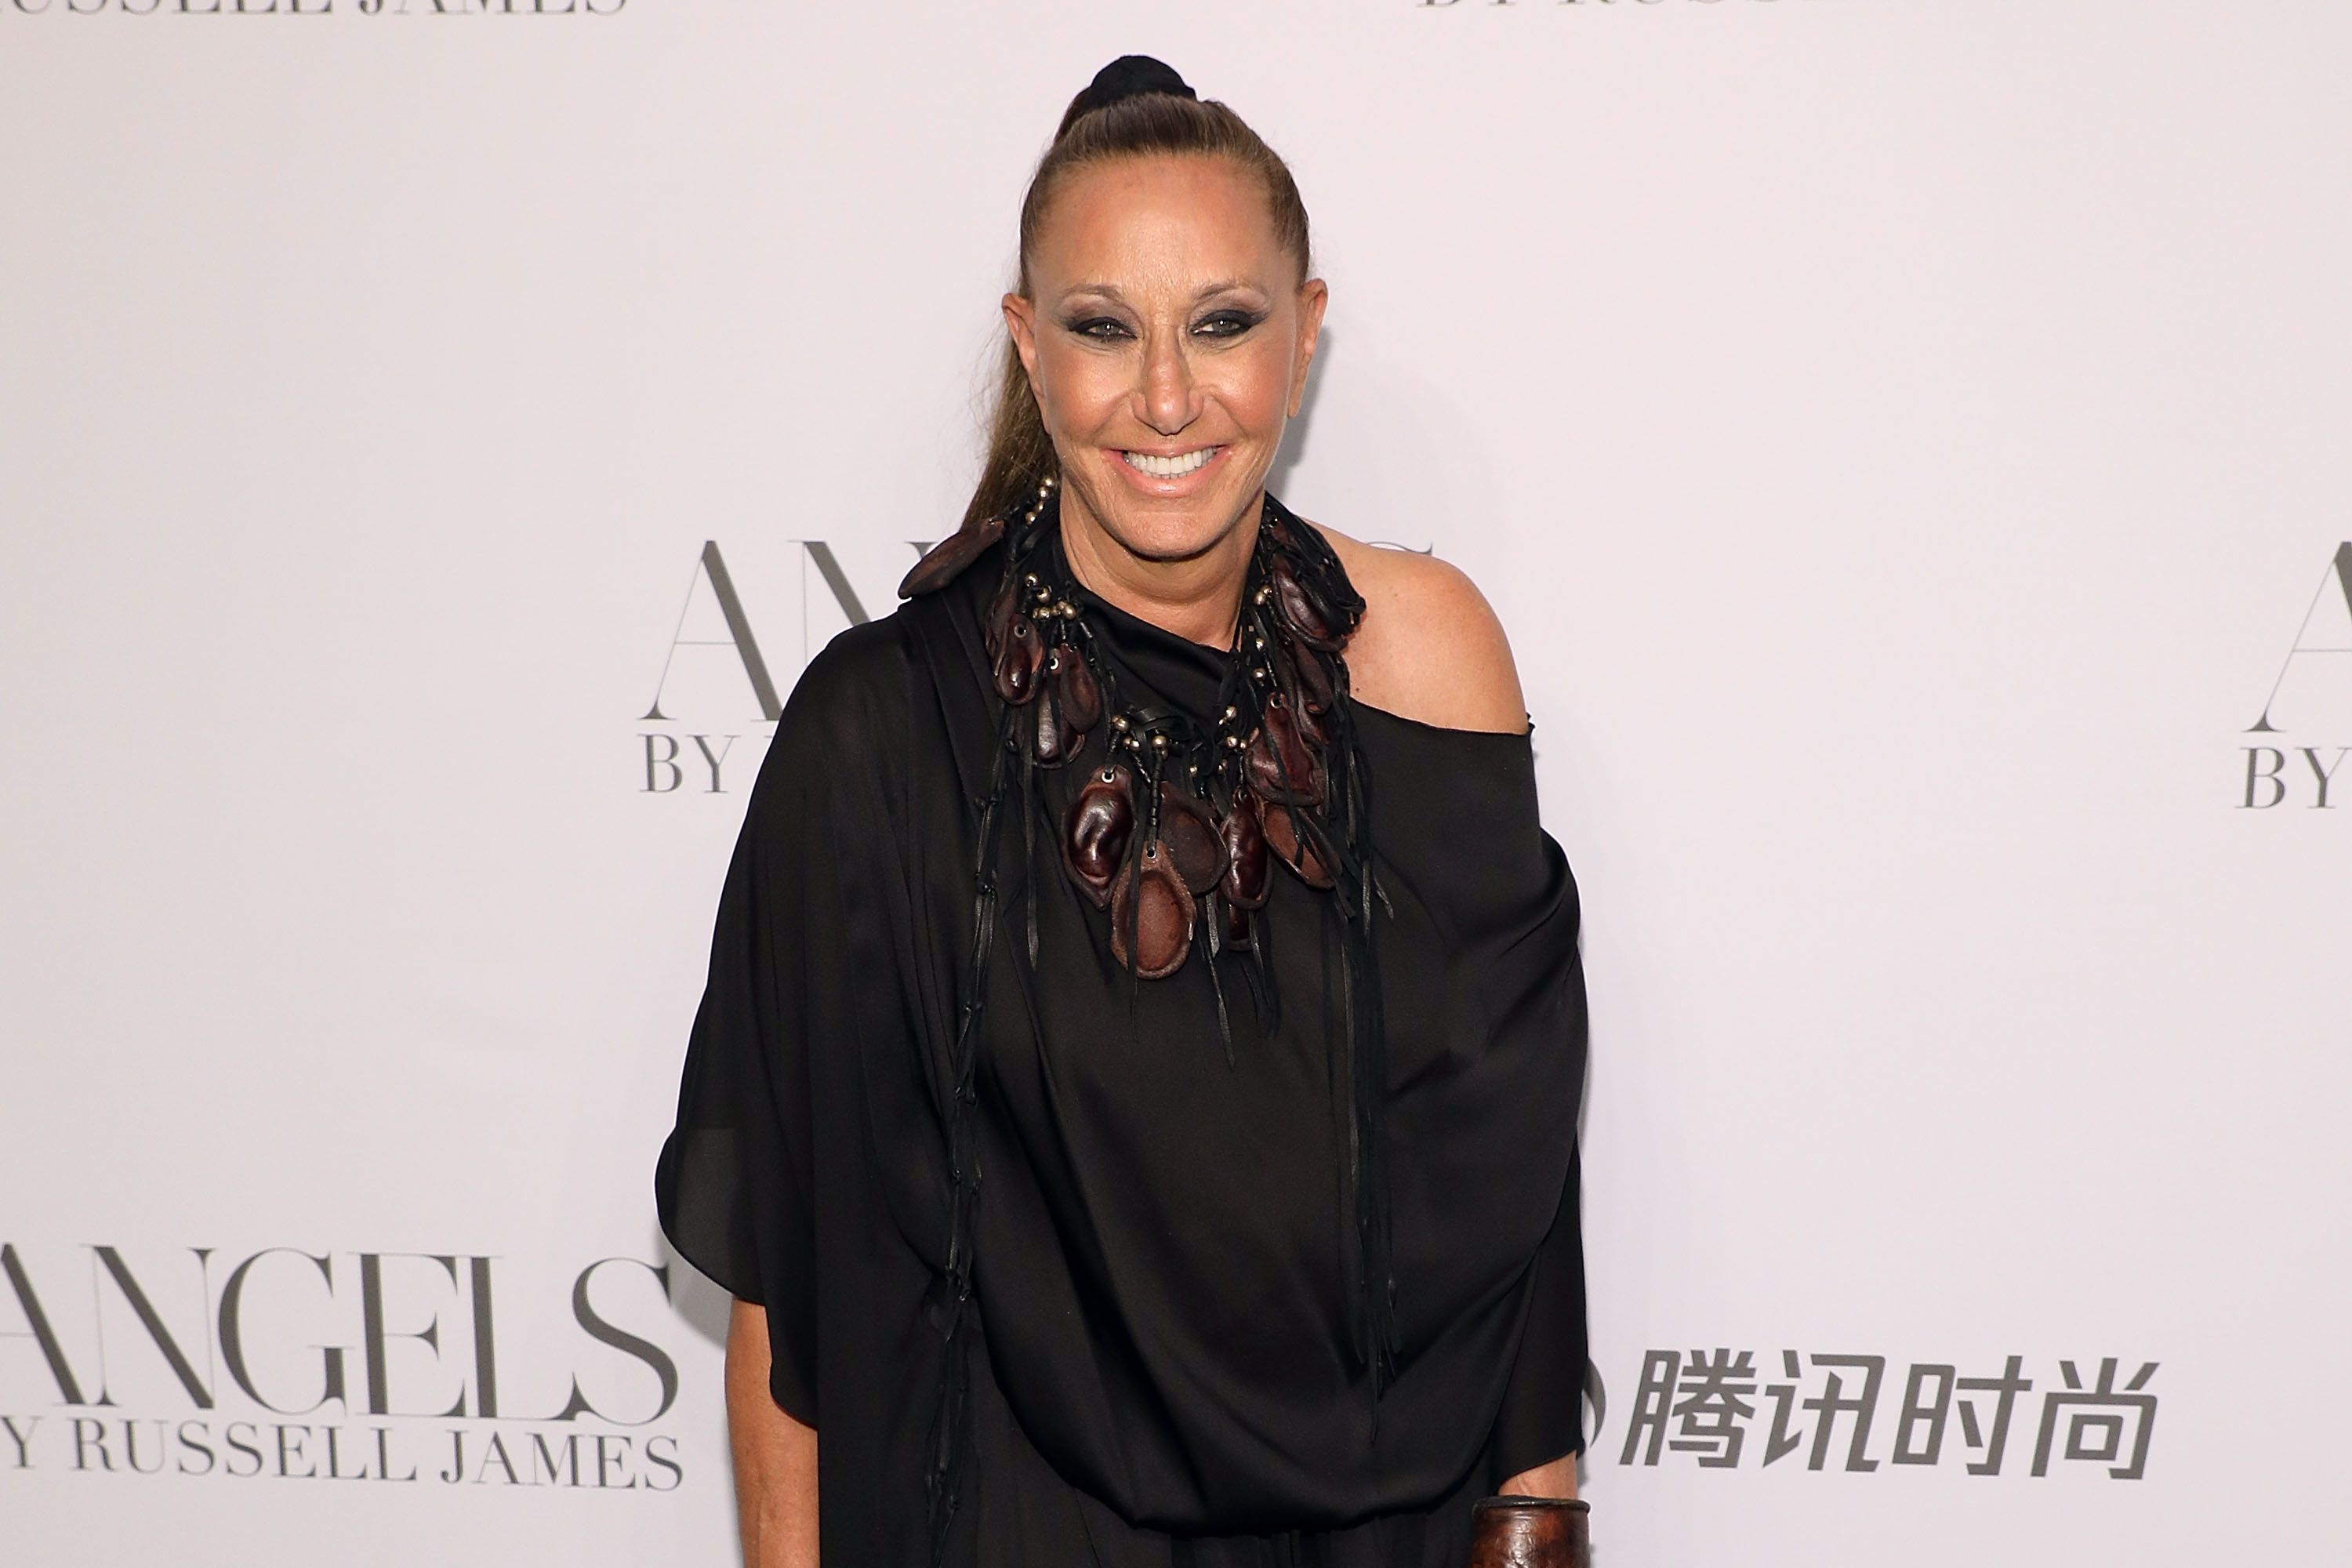 Donna Karan: A roundup of the designer's most iconic look